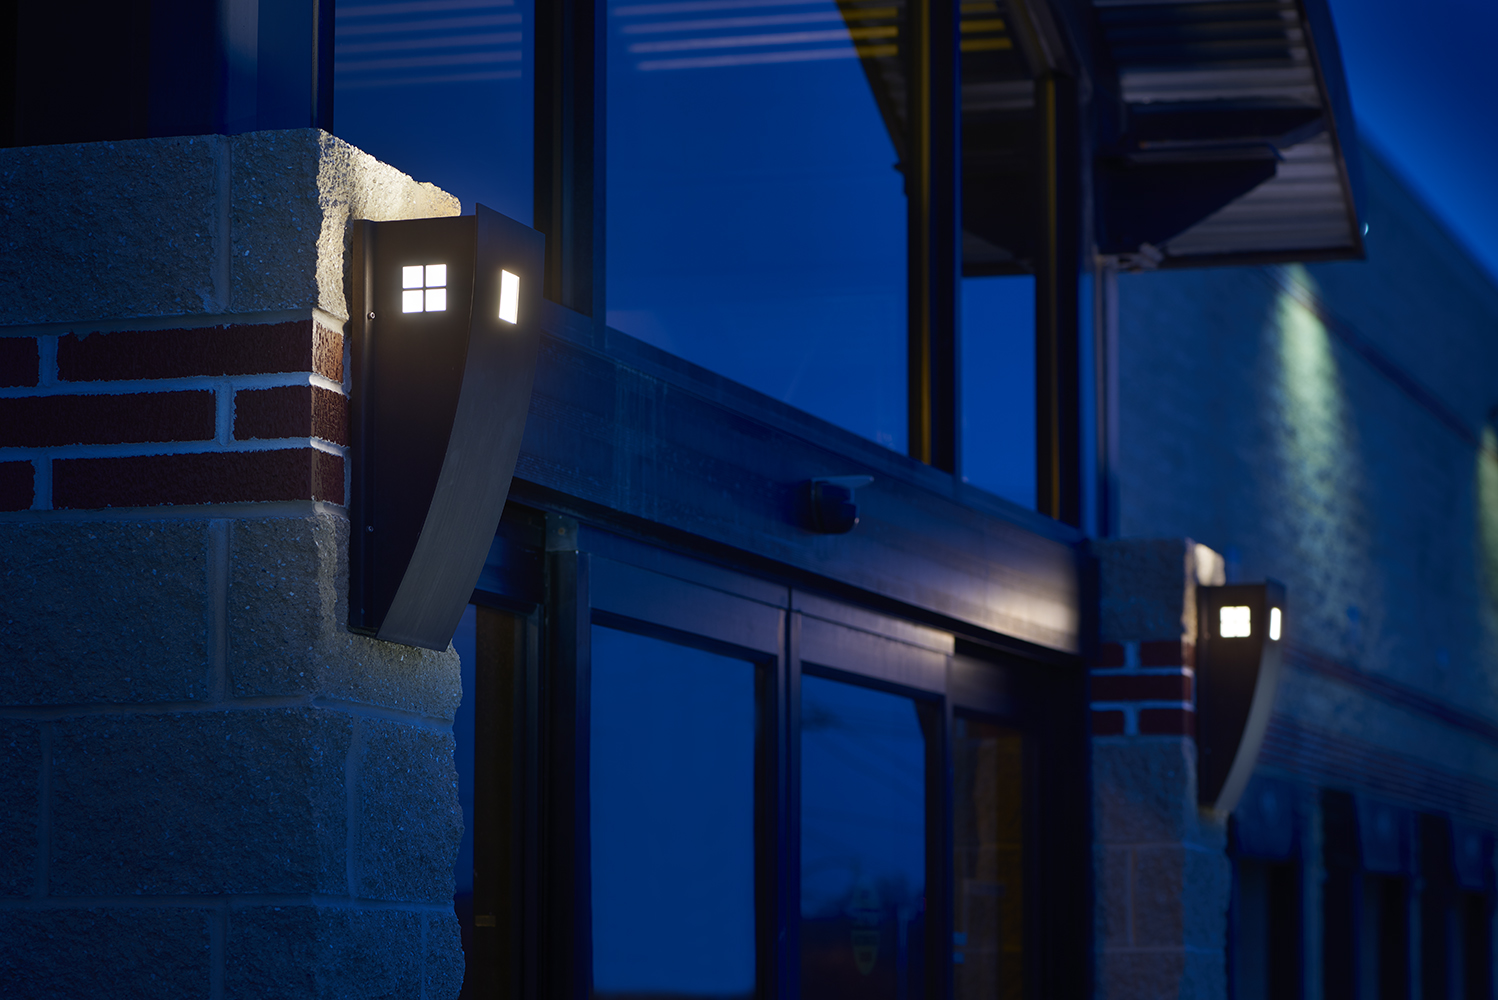 Cypress outdoor light fixture illuminates a dark exterior doorway, with small window cutouts on the side of the luminaire body.